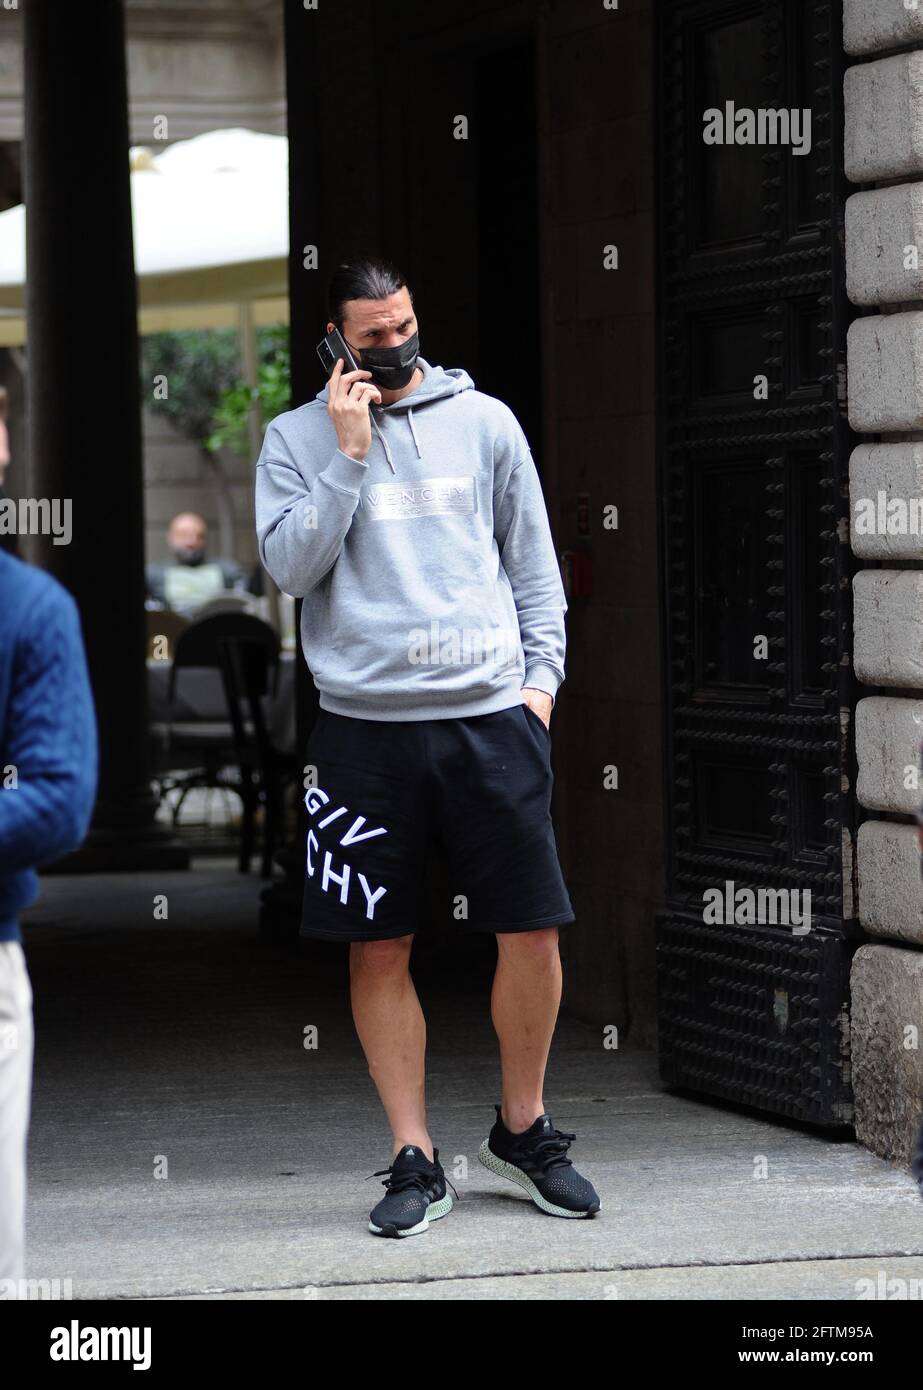 Milan, Zlatan Ibrahimovic has lunch in the center Zlatan Ibrahimovic  striker of MILAN and of the SWEDEN national team, after having lunch in a  well-known restaurant in the center together with Ignazio